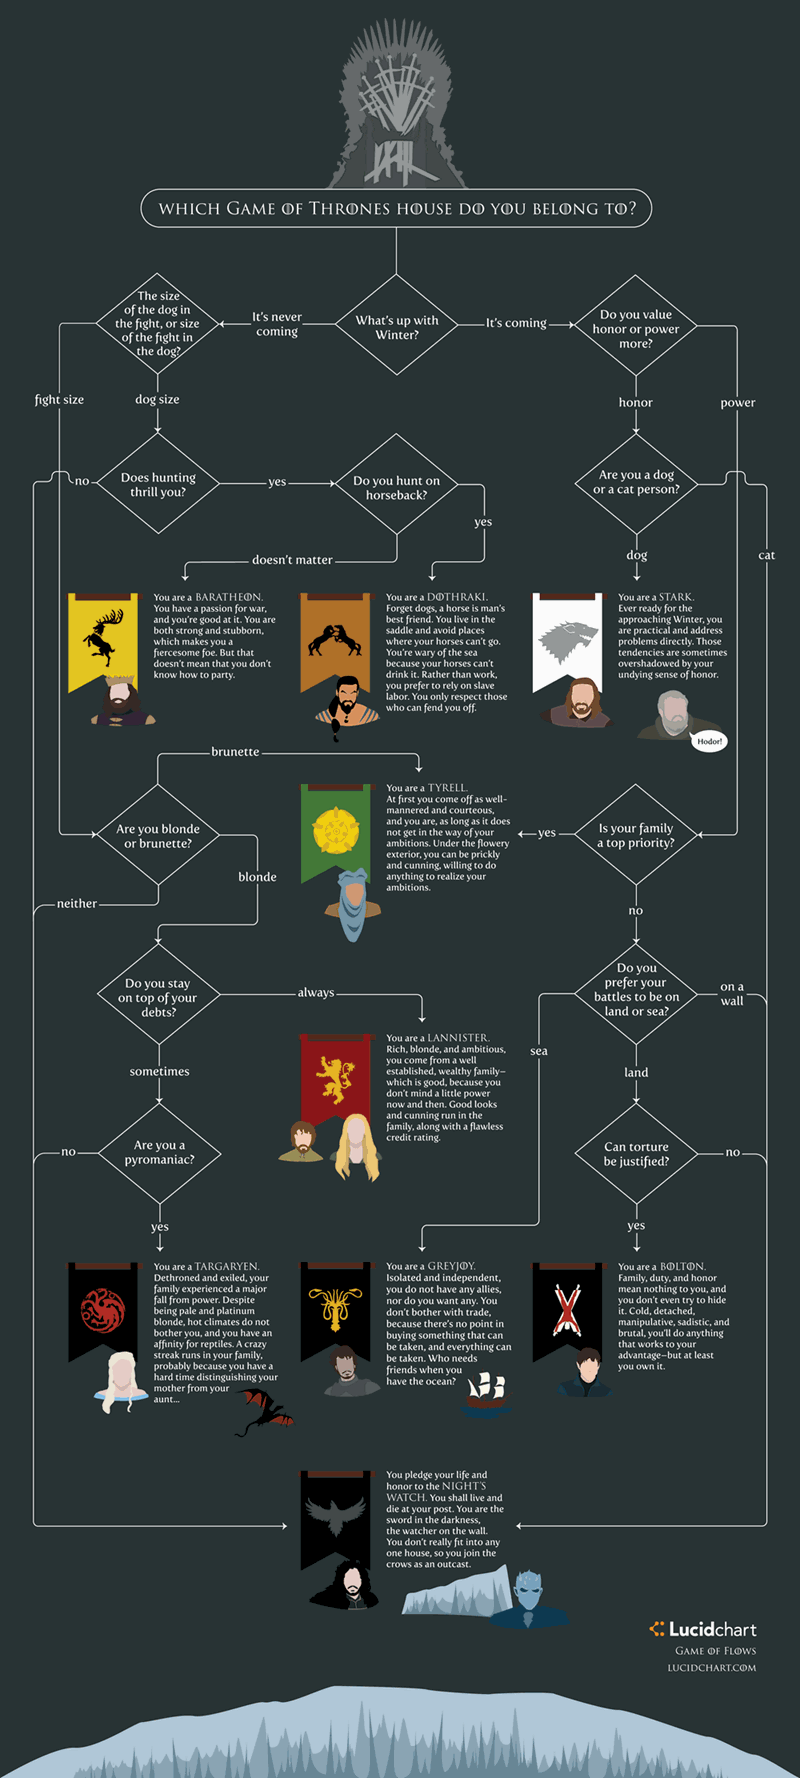 Use This Handy Flowchart to Figure out Which Game of Thrones House You'd Belong To